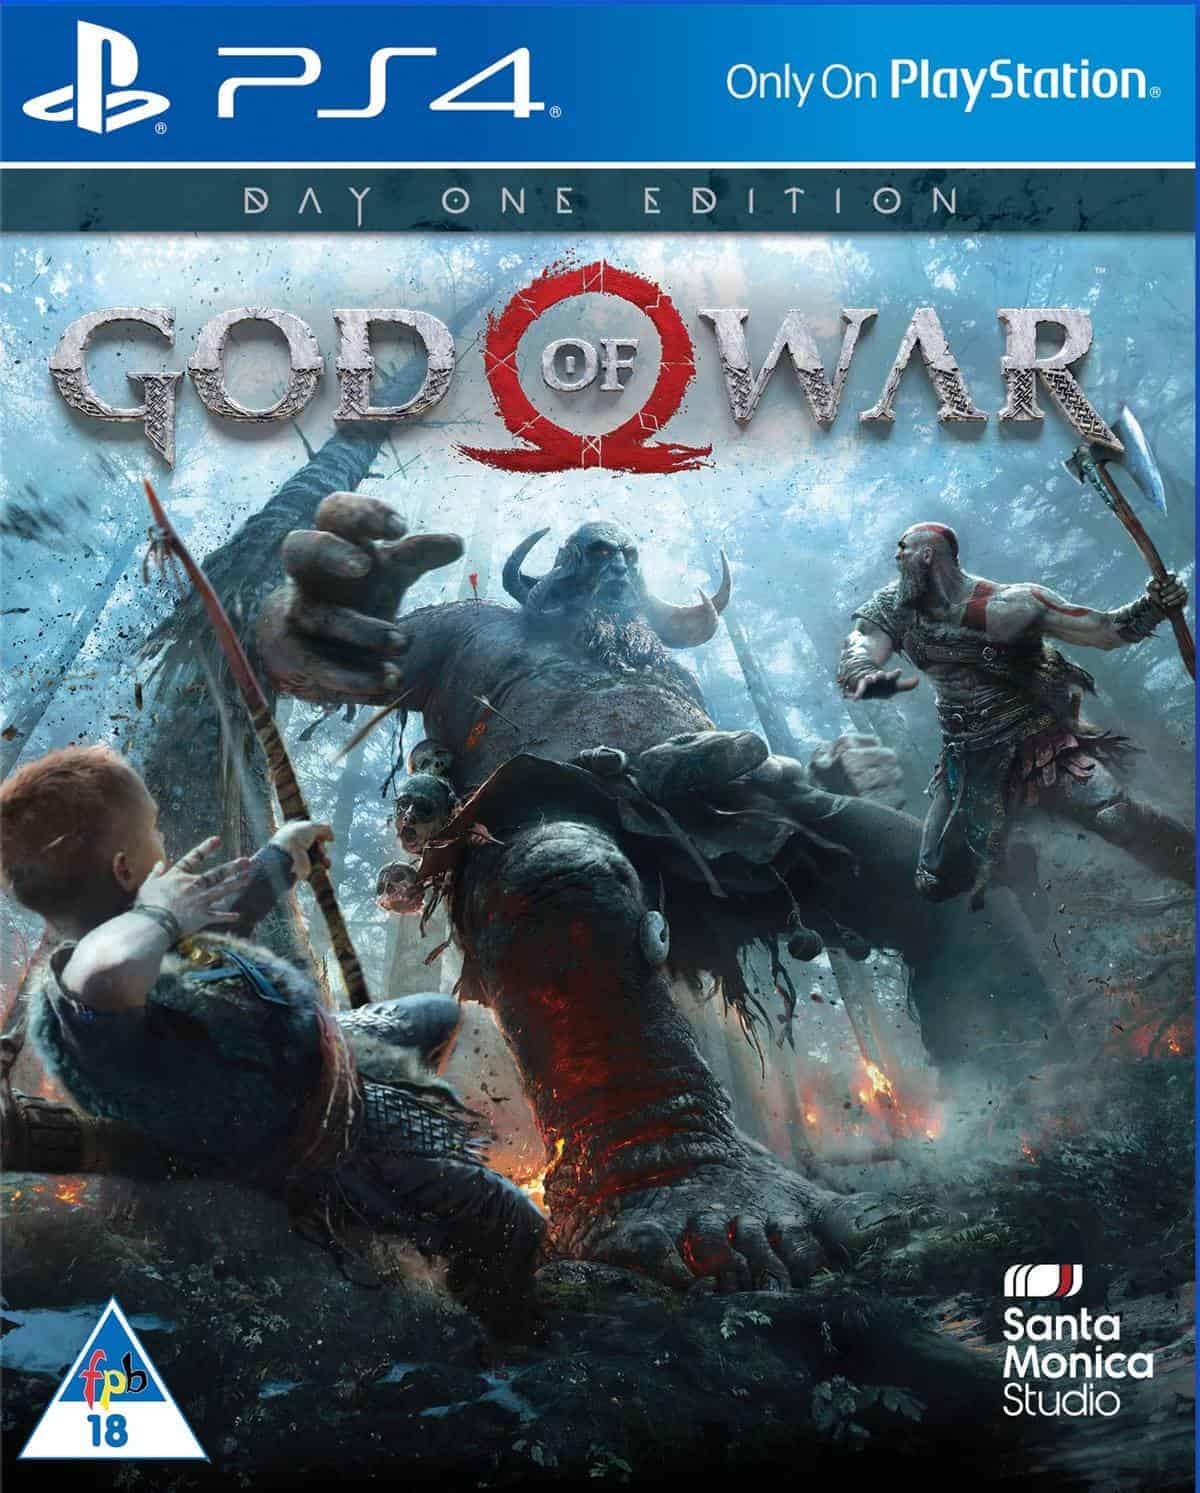 God Of War 4's Exclusive Cover